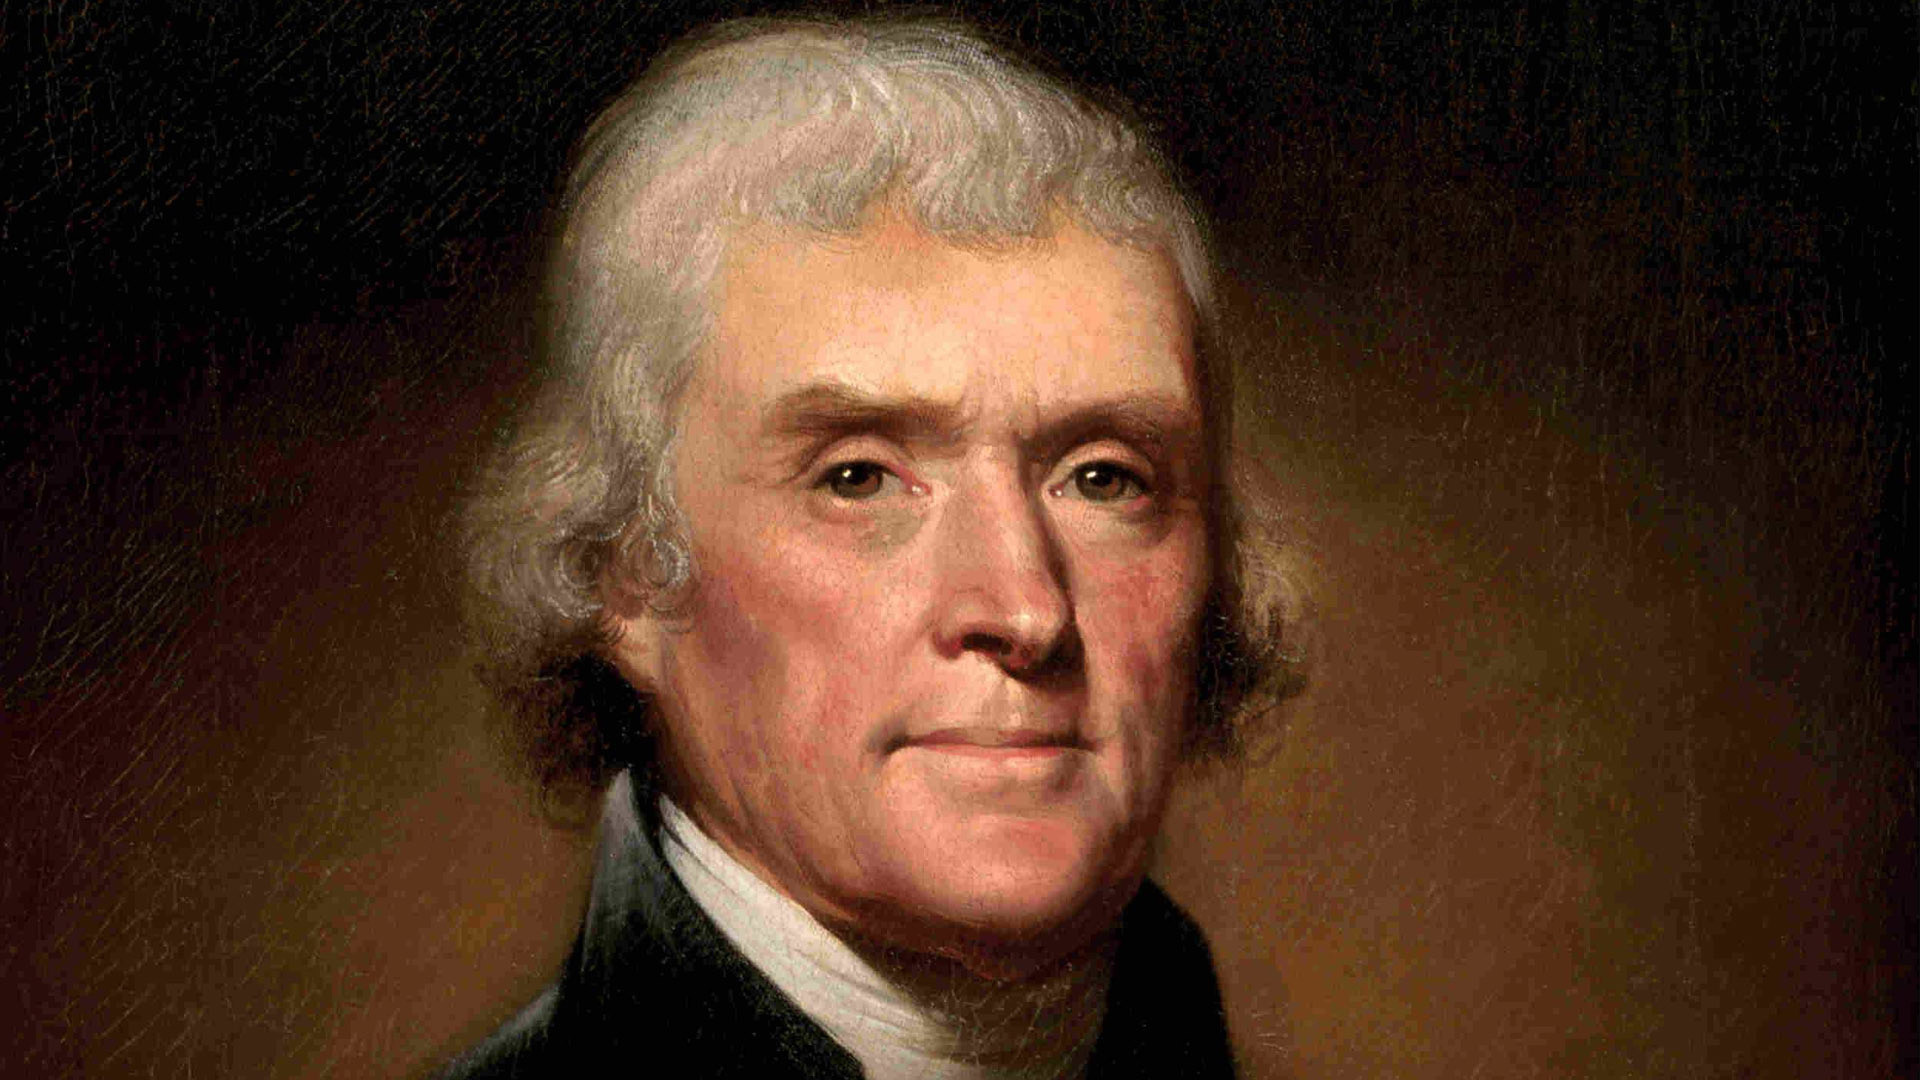 1920x1080 ... Thomas Jefferson, Politician, The Founding Father Of The United States,  Author Of The Declaration Of Independence, Thomas Jefferson Paint Wallpapers  ...